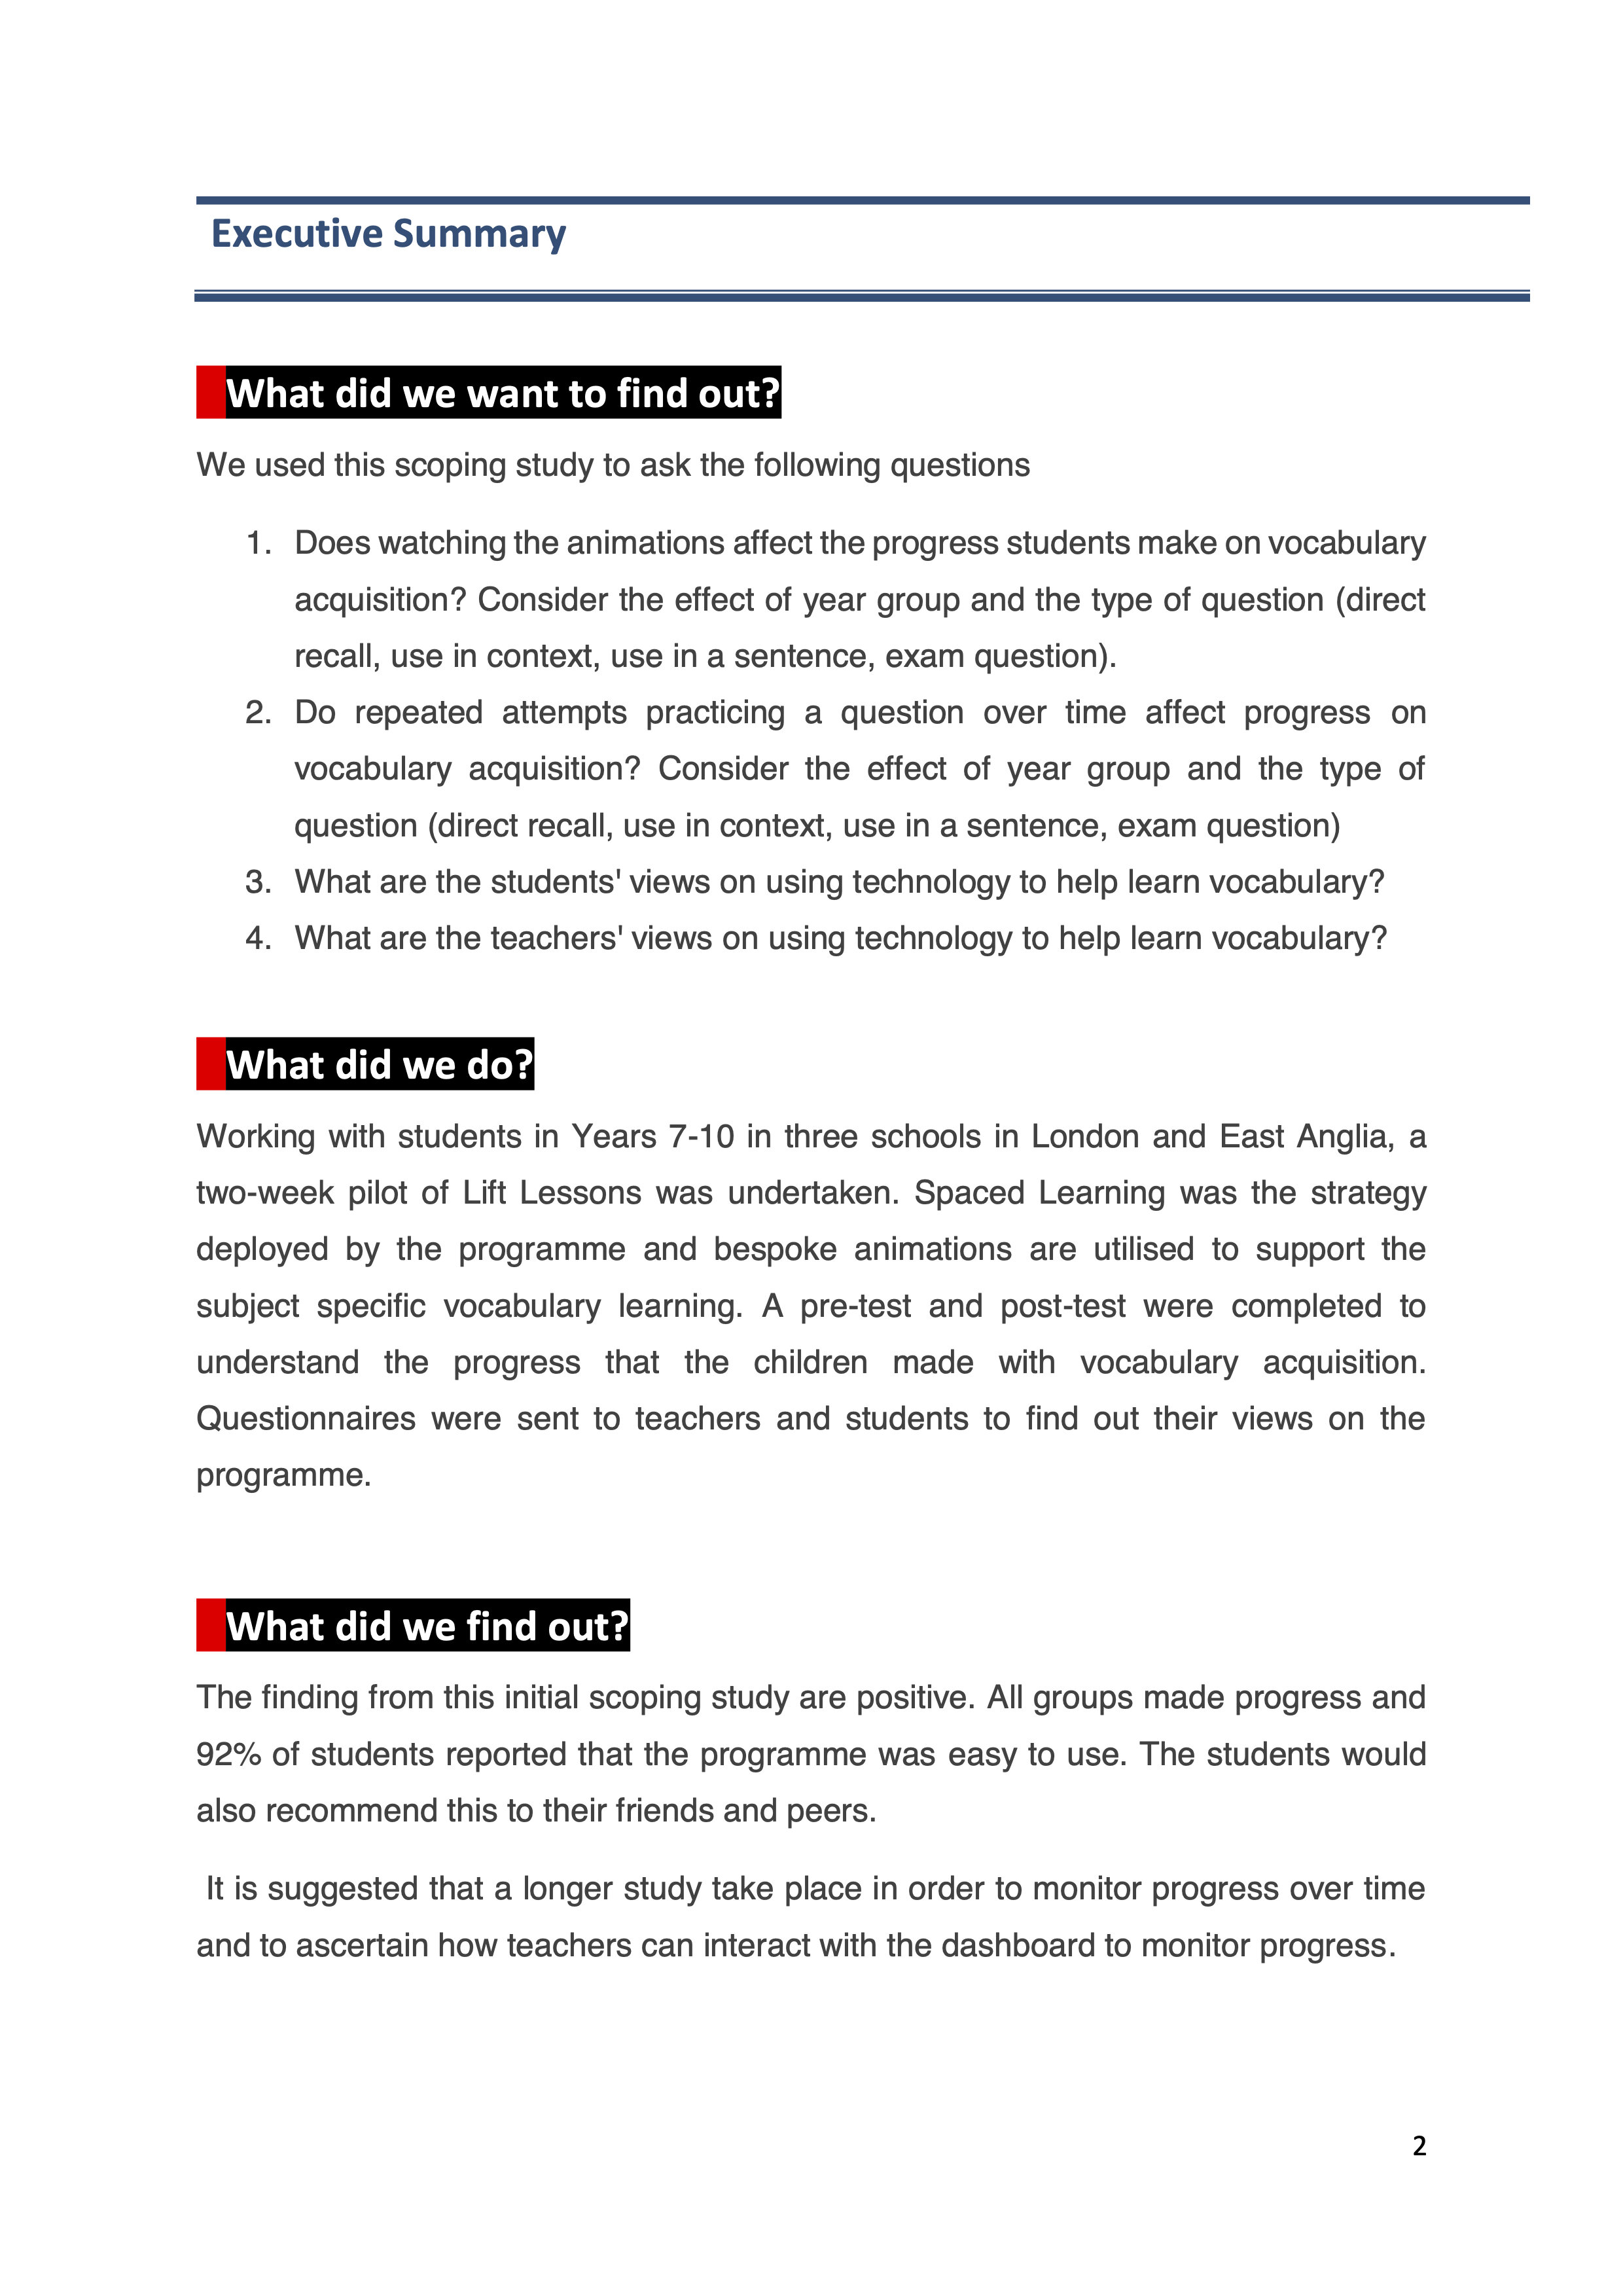 Lift Lessons + UCL Scoping Study Page 2 (Copy)